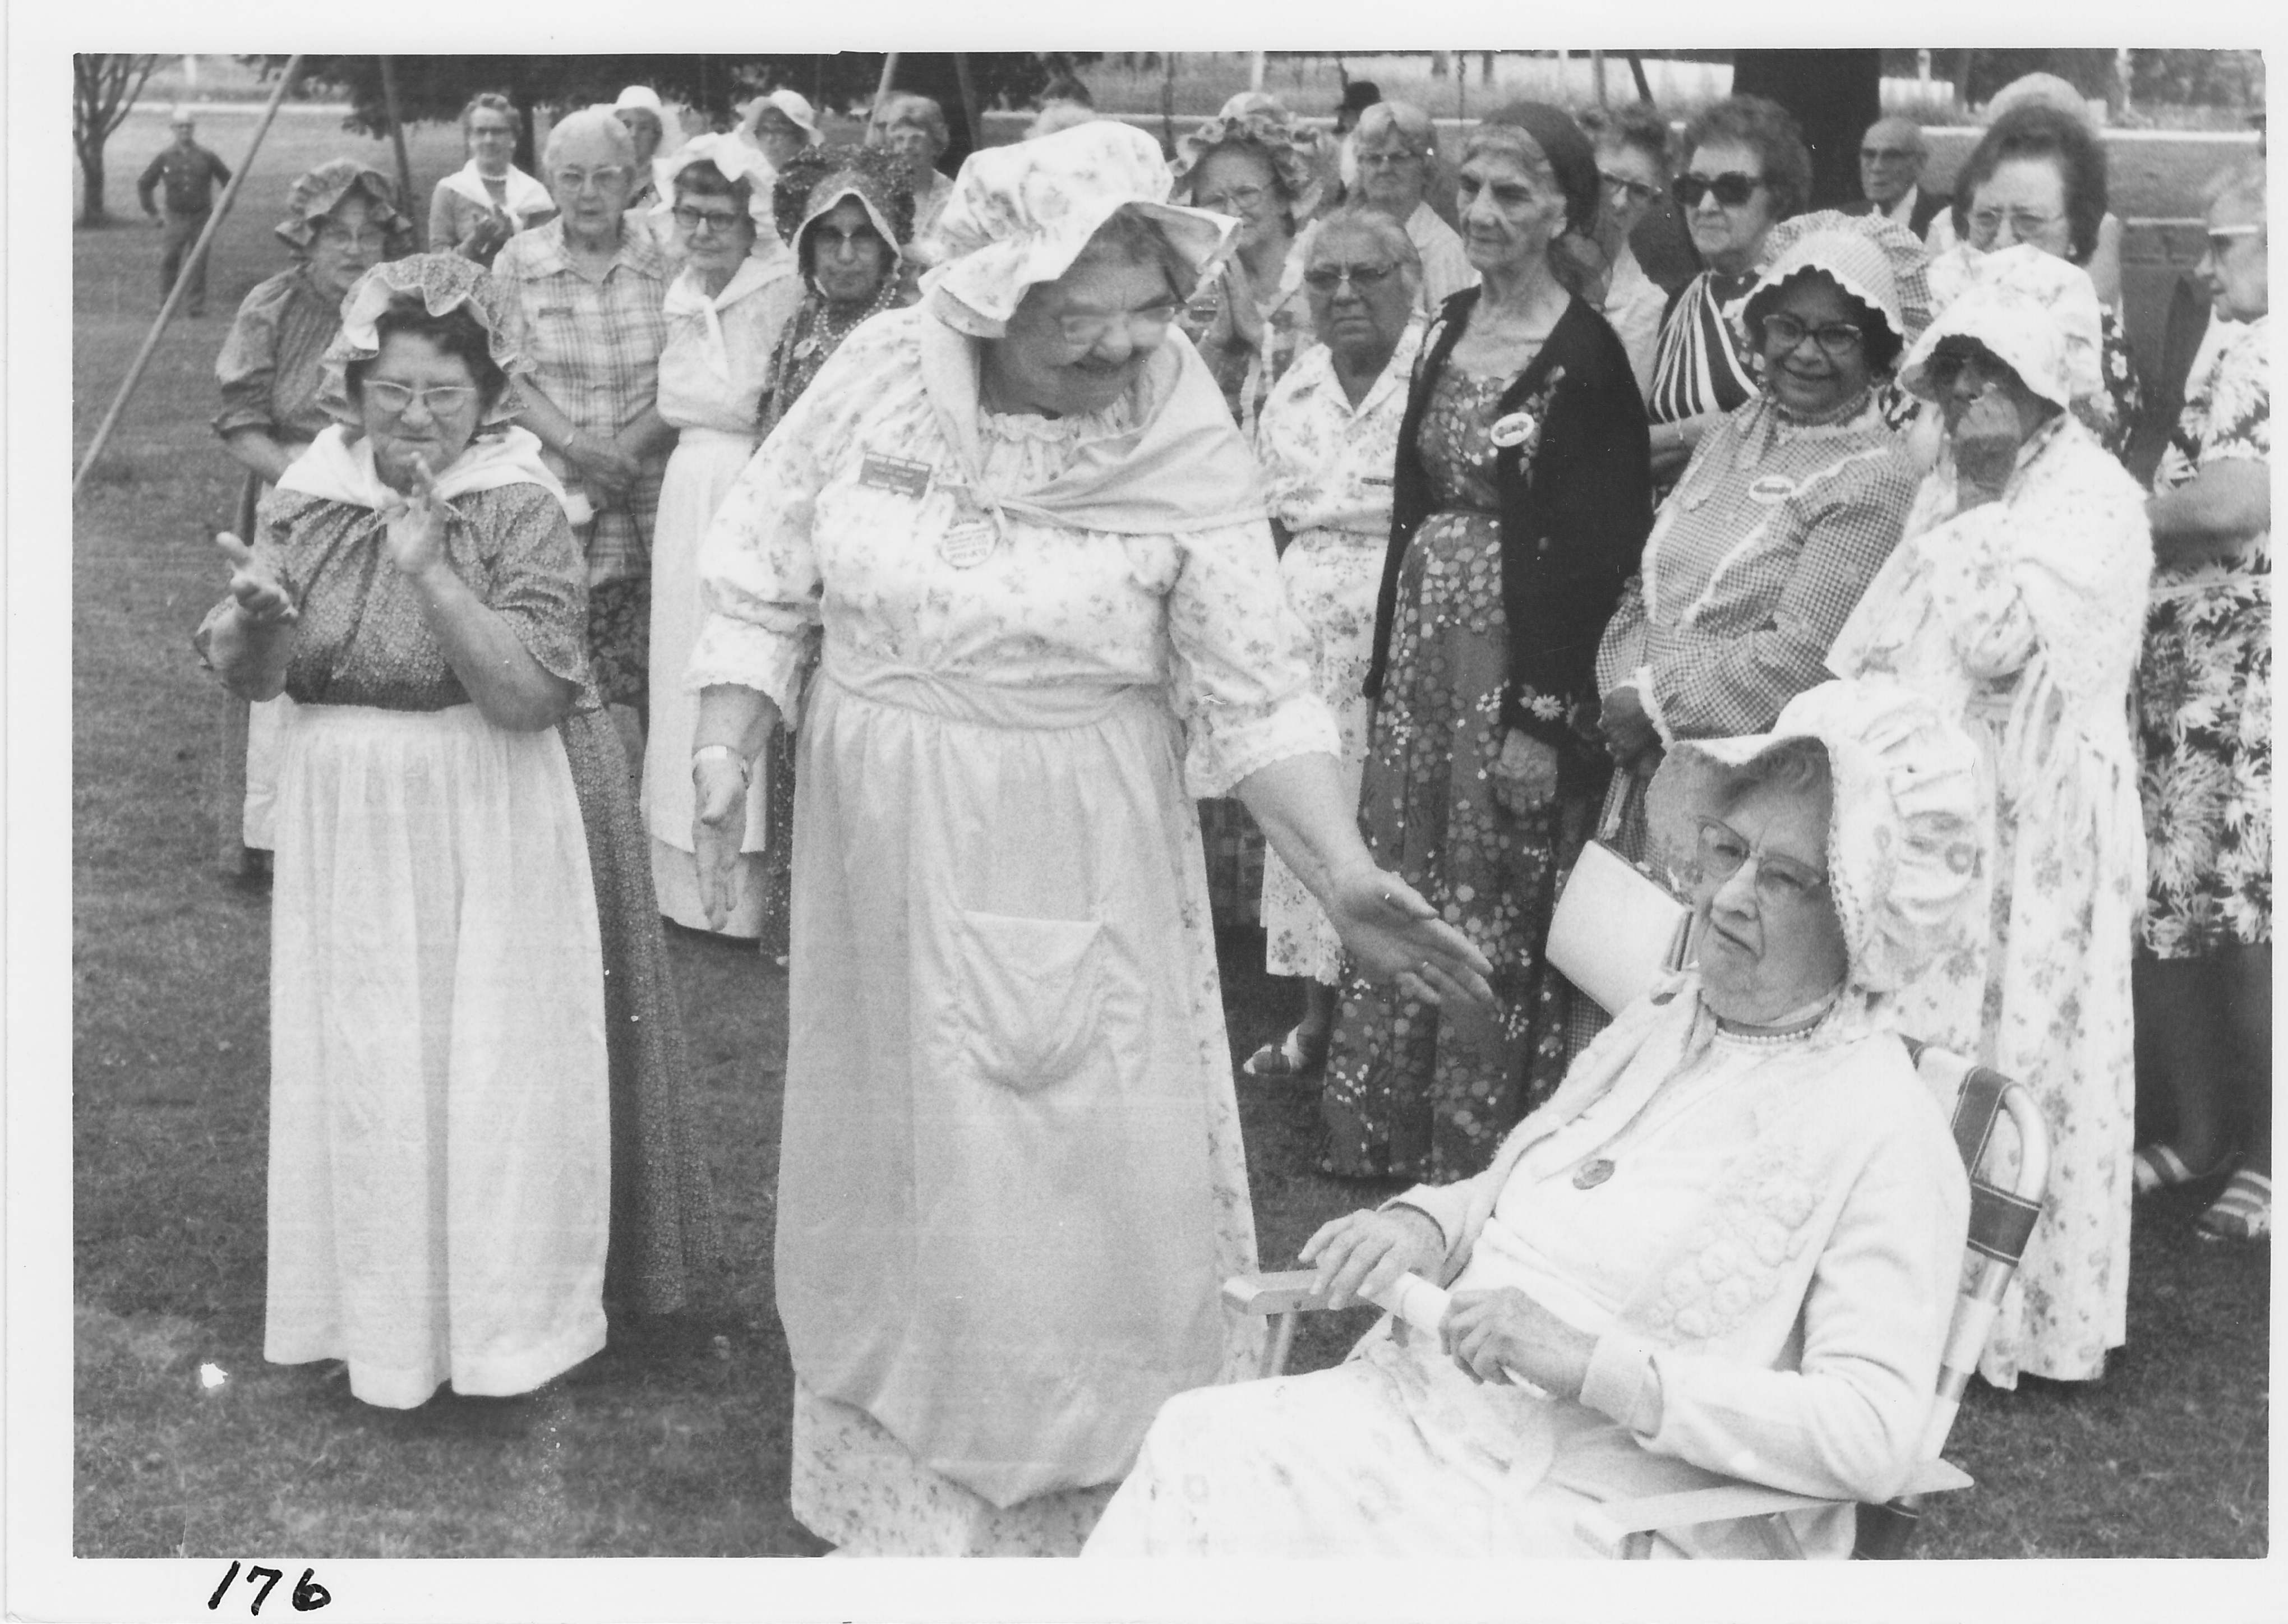 Bicentennial Celebration:  Florence Mannschreck, Mazie Clark and Minnie Green at front. Old fashioned dress contest, July 1976.